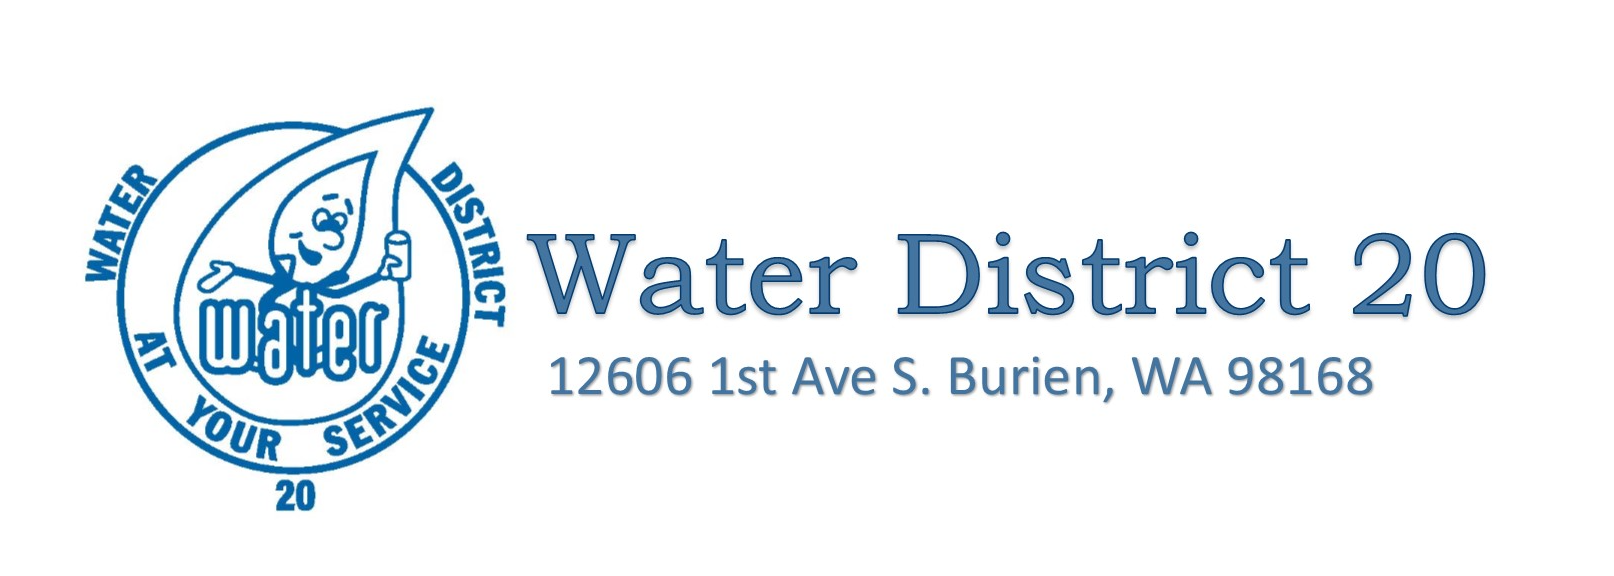 King County Water District #20